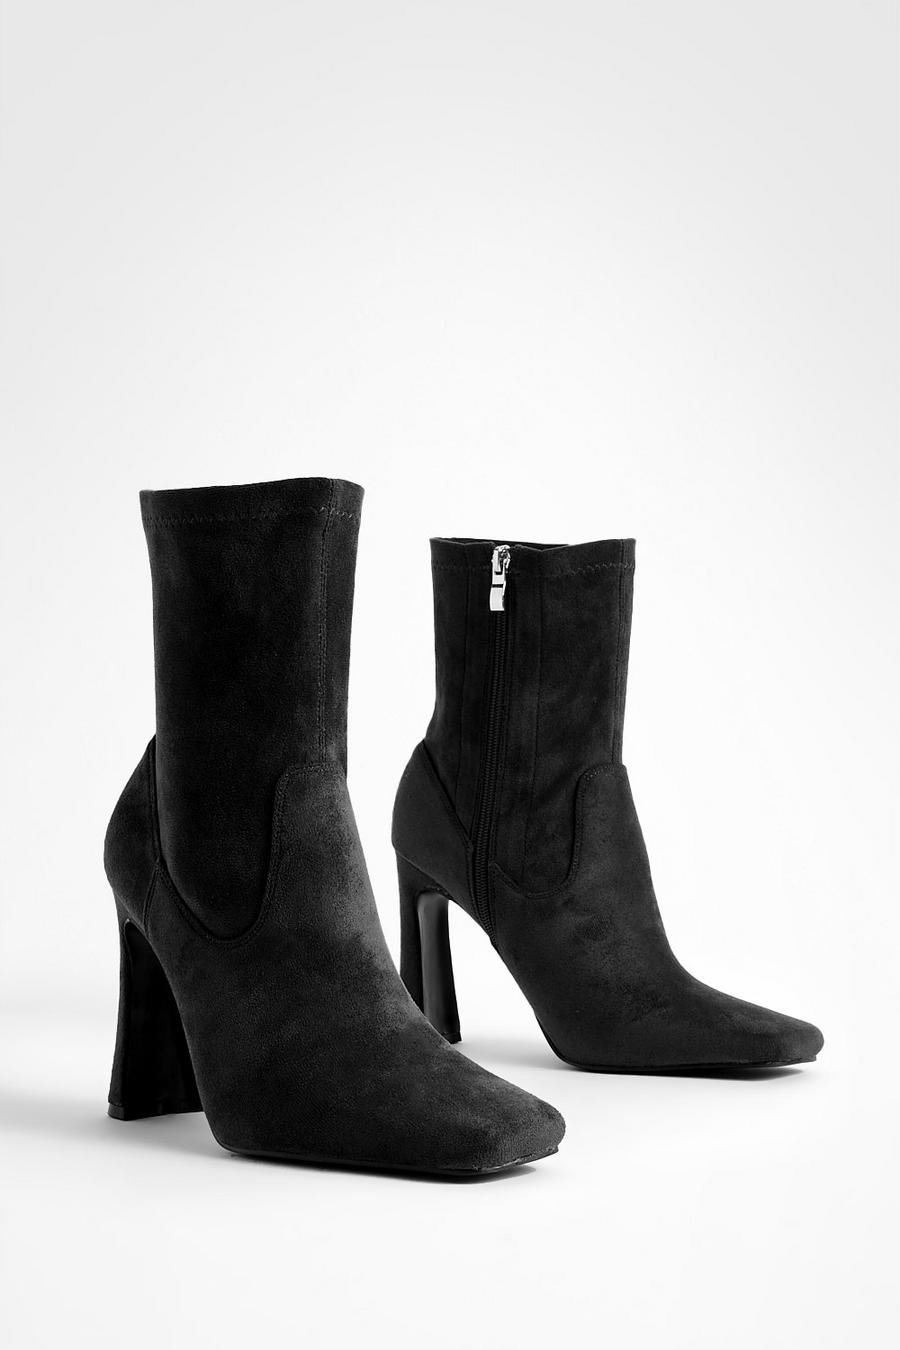 Flare Heel Pointed Toe Sock Boots  